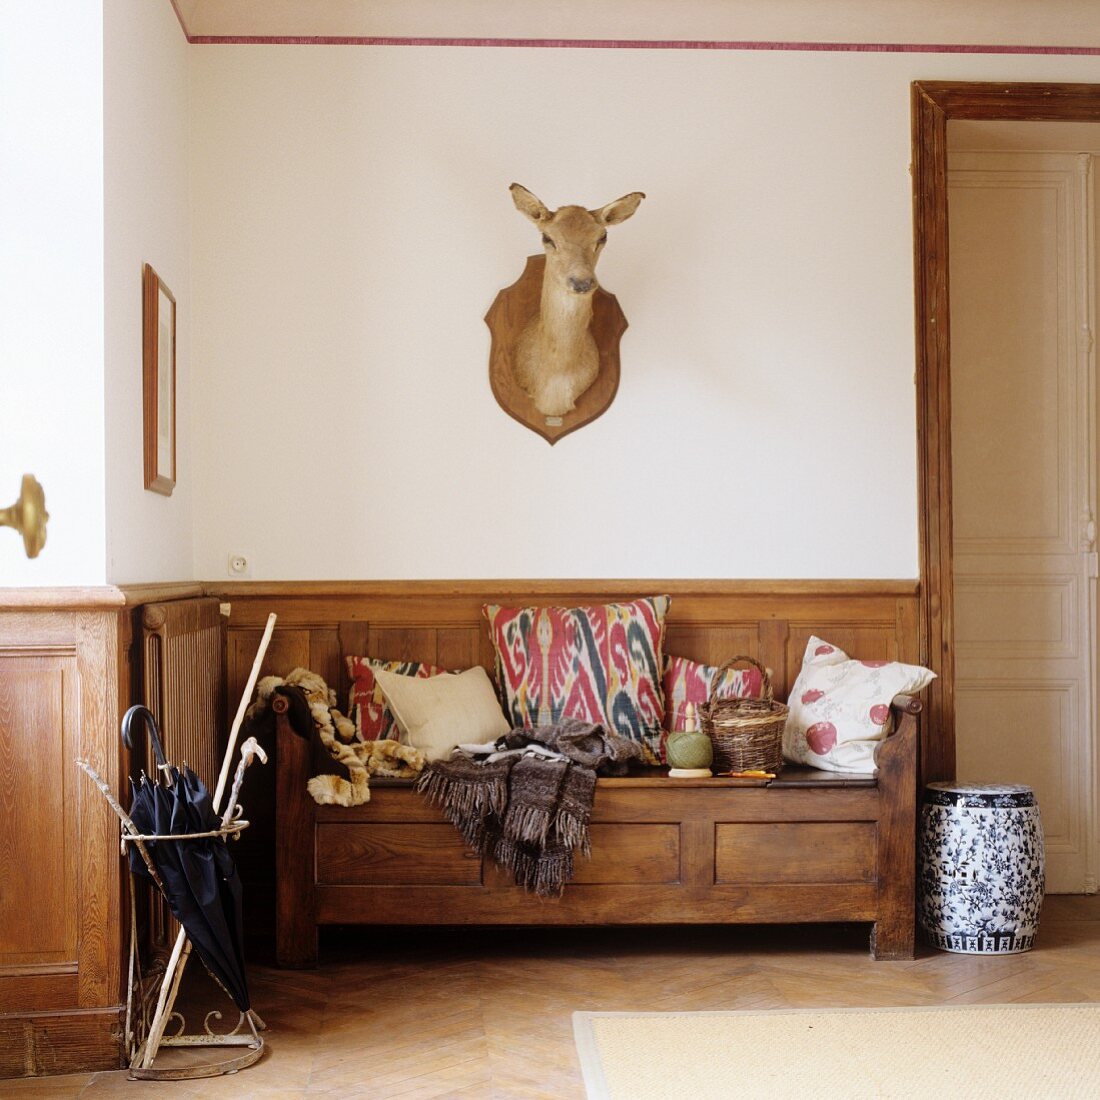 Foyer with rustic wooden bench and hunting trophy on wall